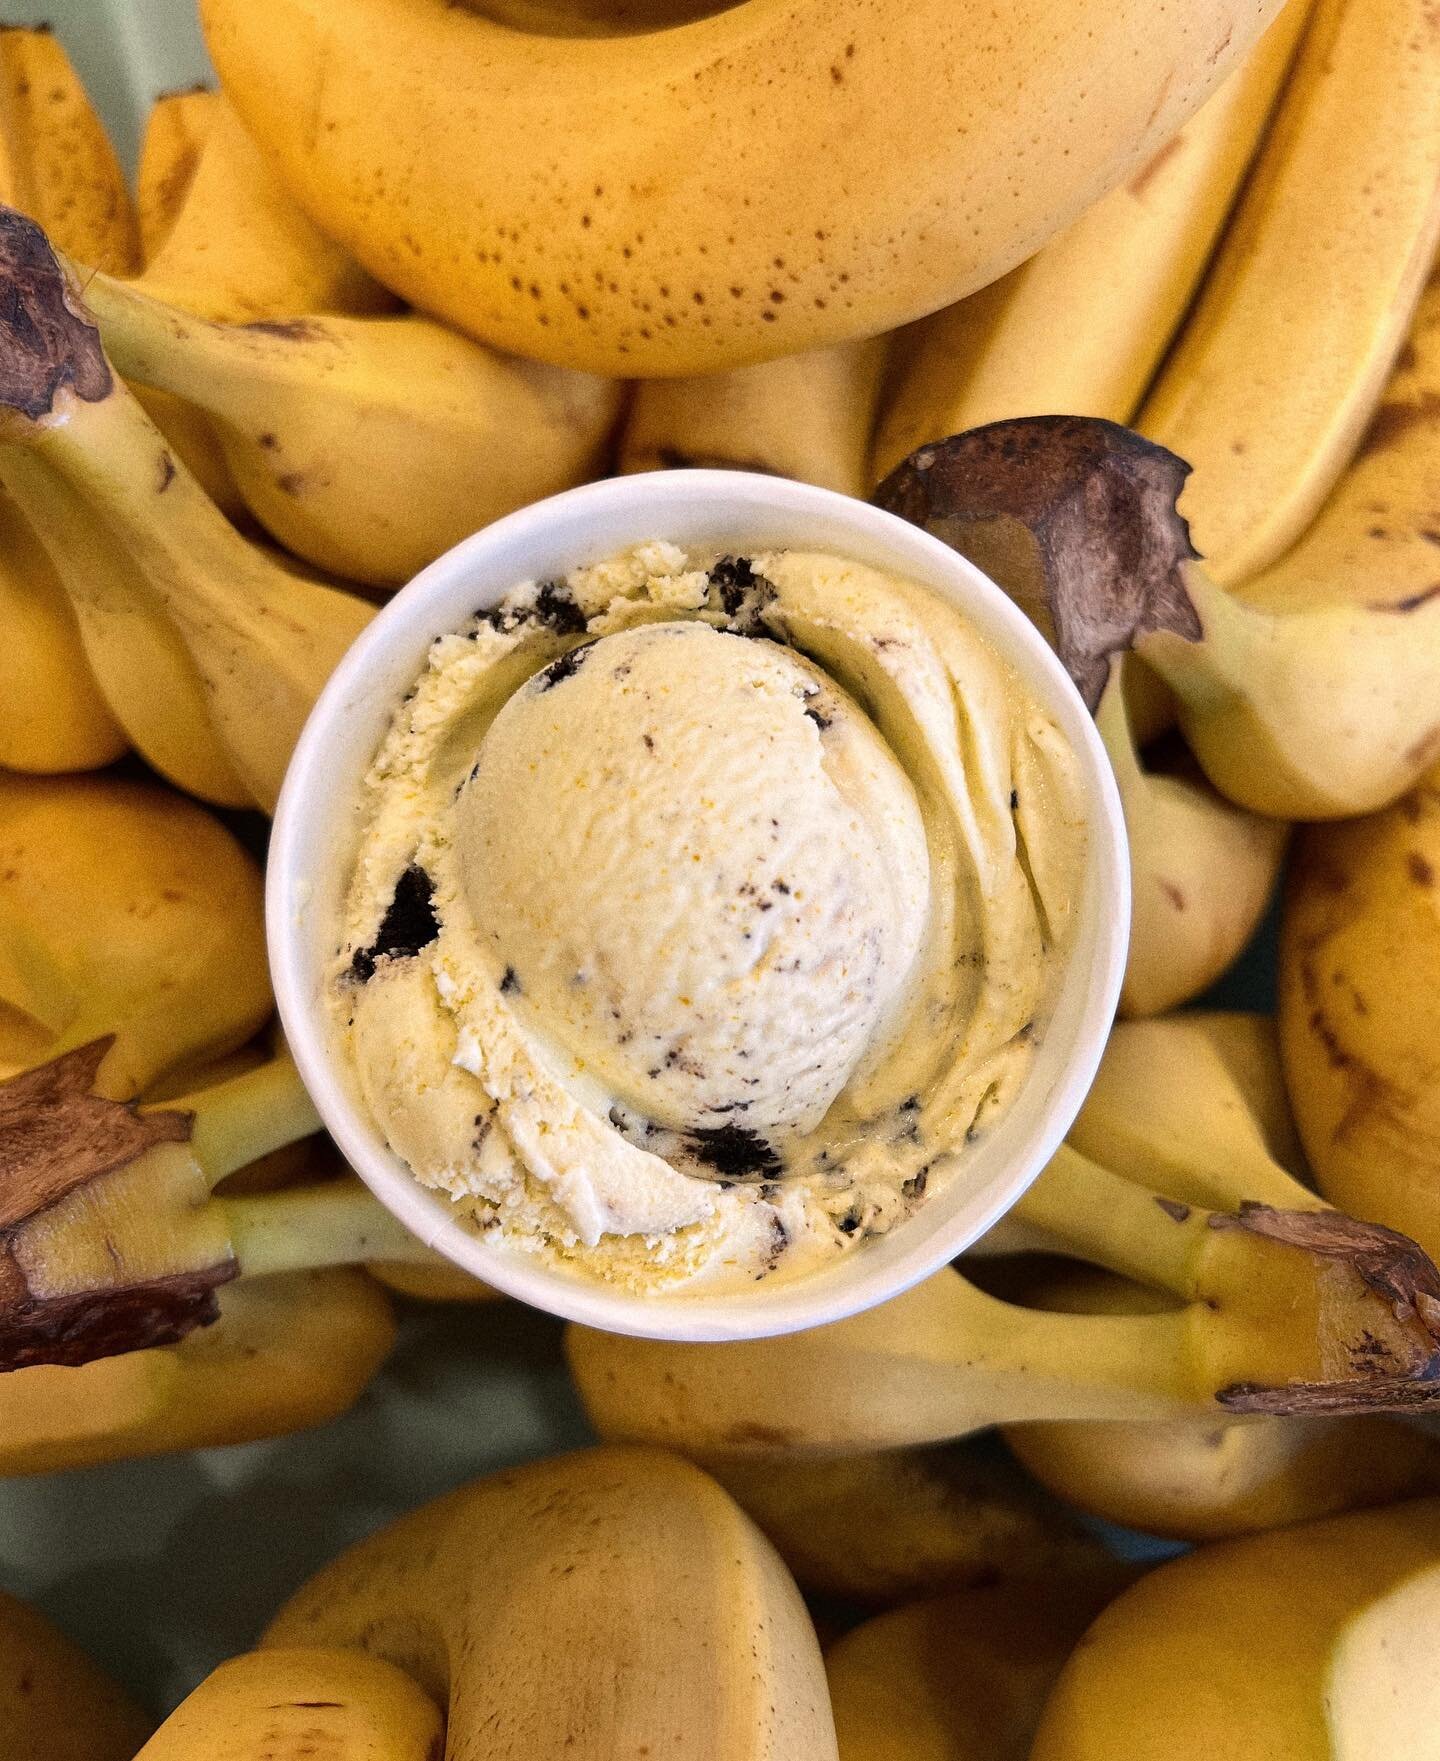 It&rsquo;s back! Just in time for this wonderful weather we&rsquo;re having😍 Come by to try our top seller,  Banana Oreo 🍌🍨 Available in pints for delivery on @ubereats &amp; @caviar
.
.
.
.
.
.
.
.
.
.
.
.
.
#lanasoakland #oakland #bayarea #foodi